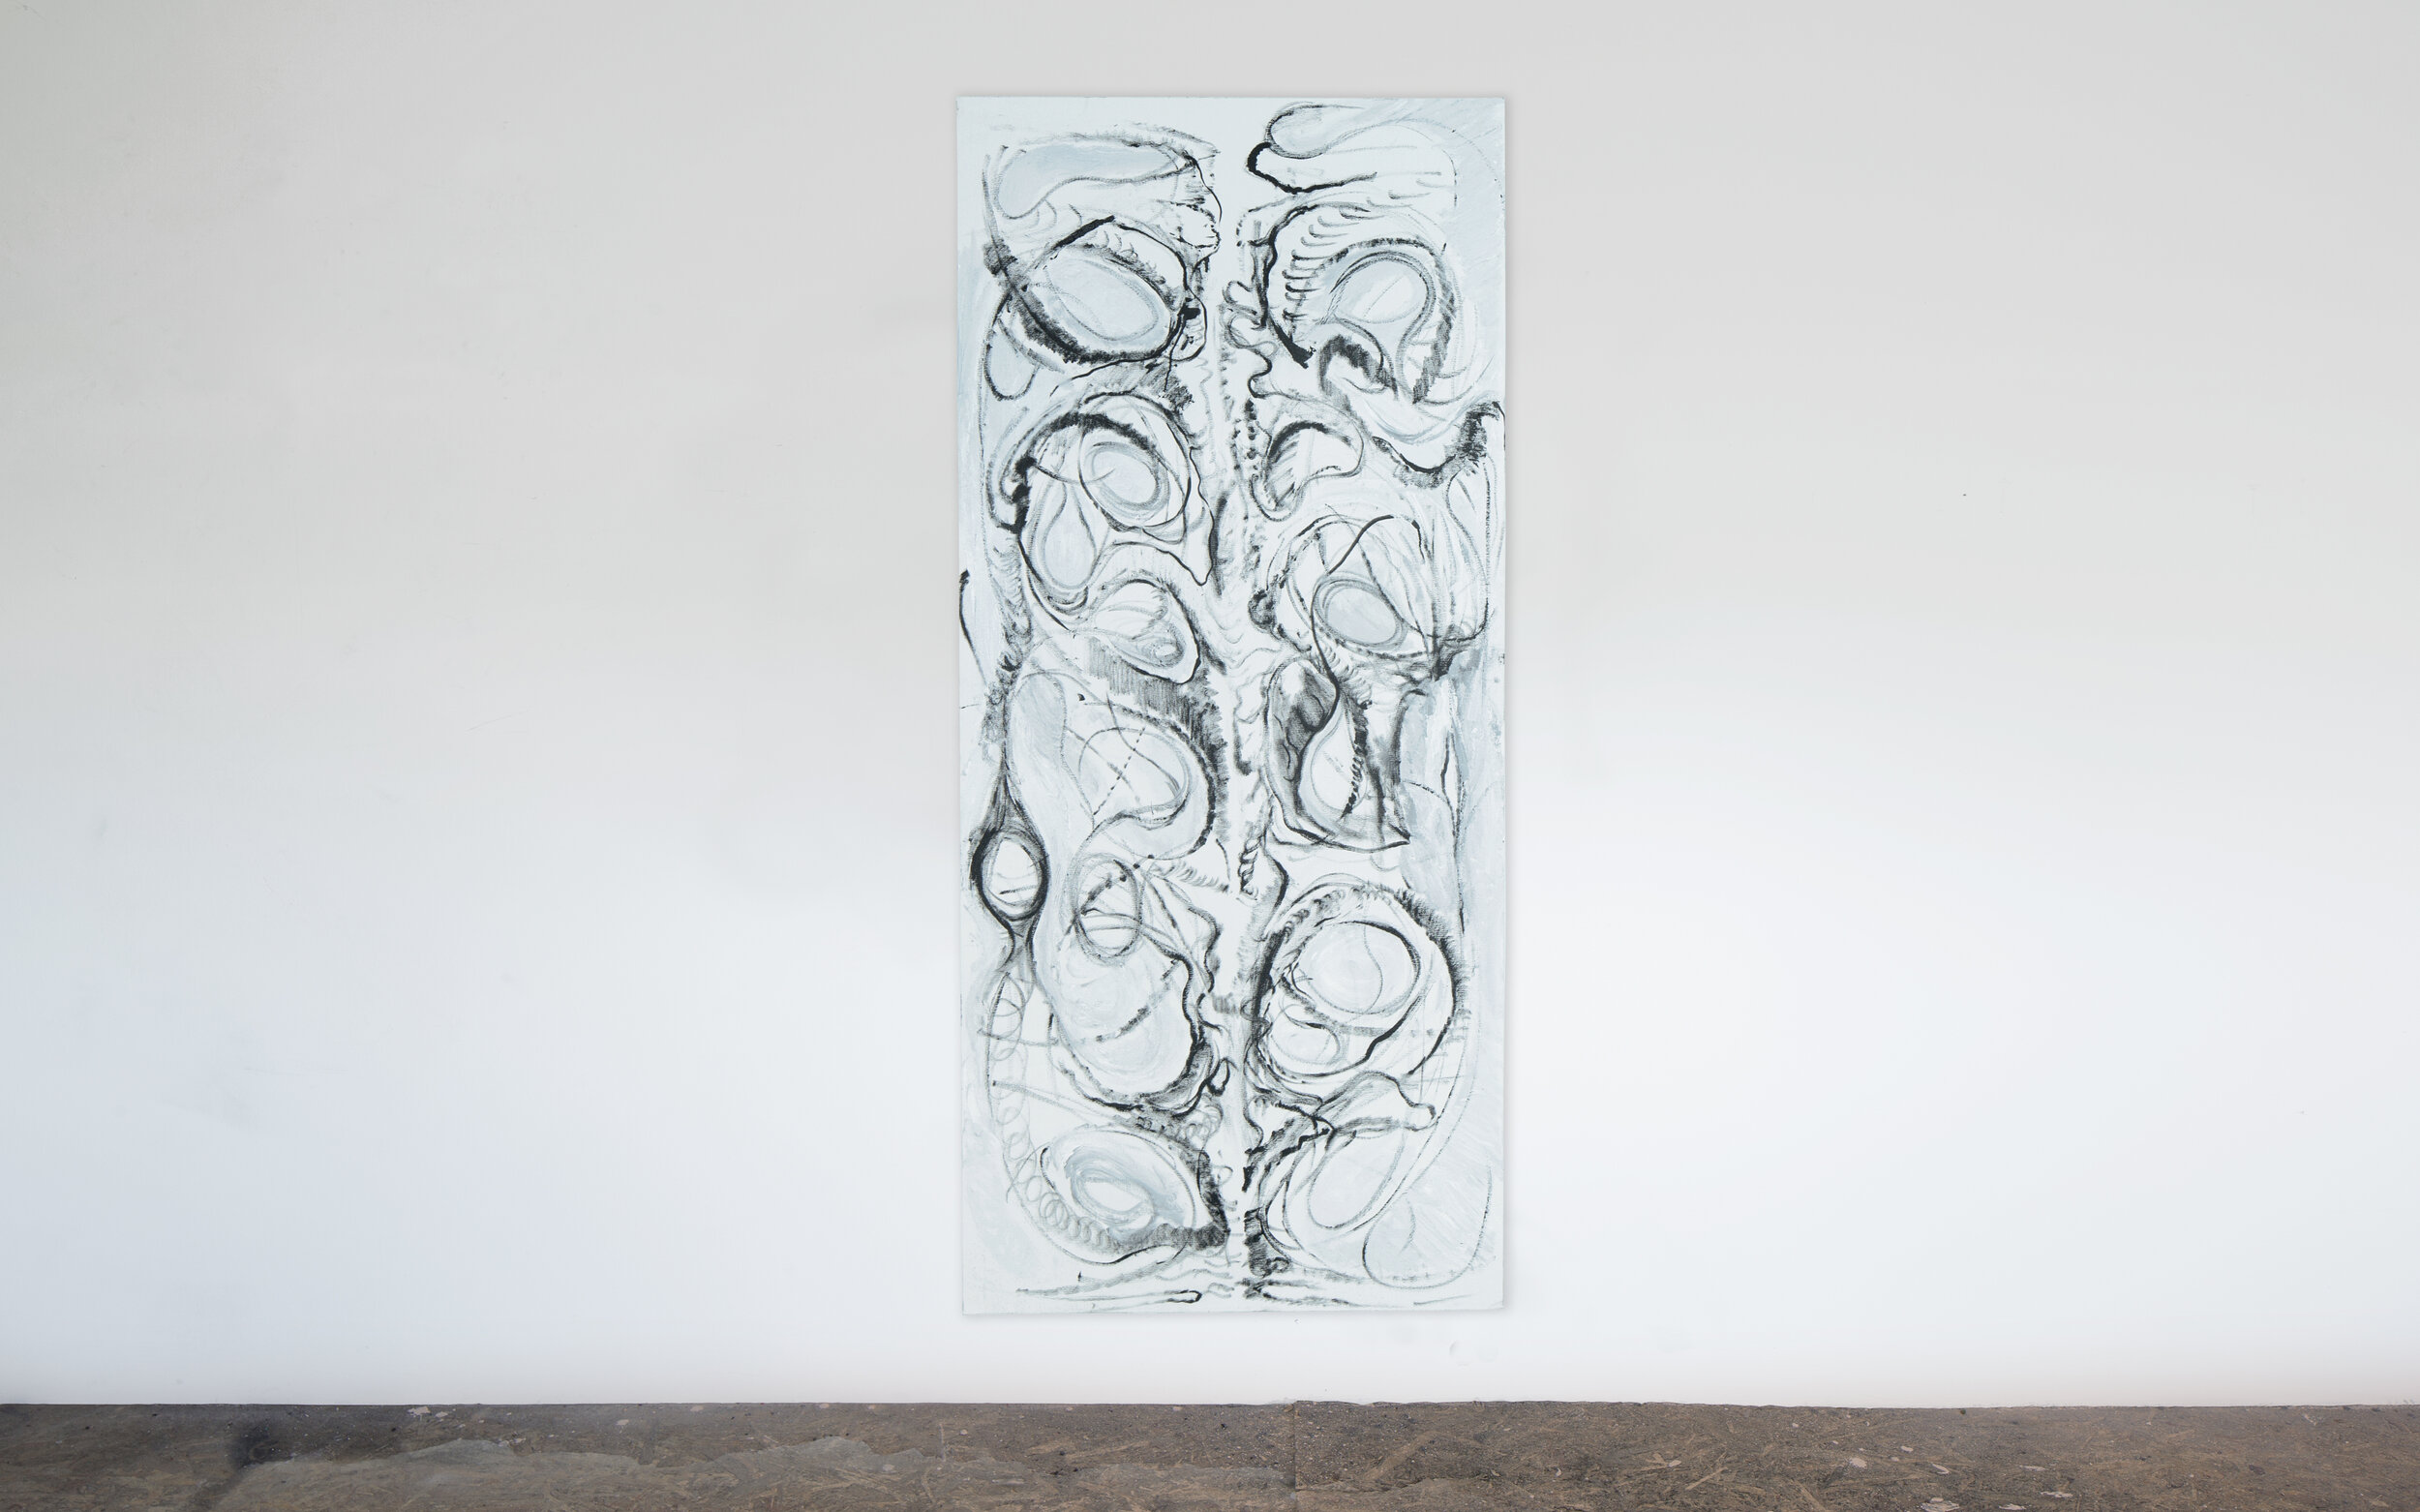  SPINE, 200 x 90 x 4 cm, 2020, Acrylic paint on canvas mounted on pvc xps panel 